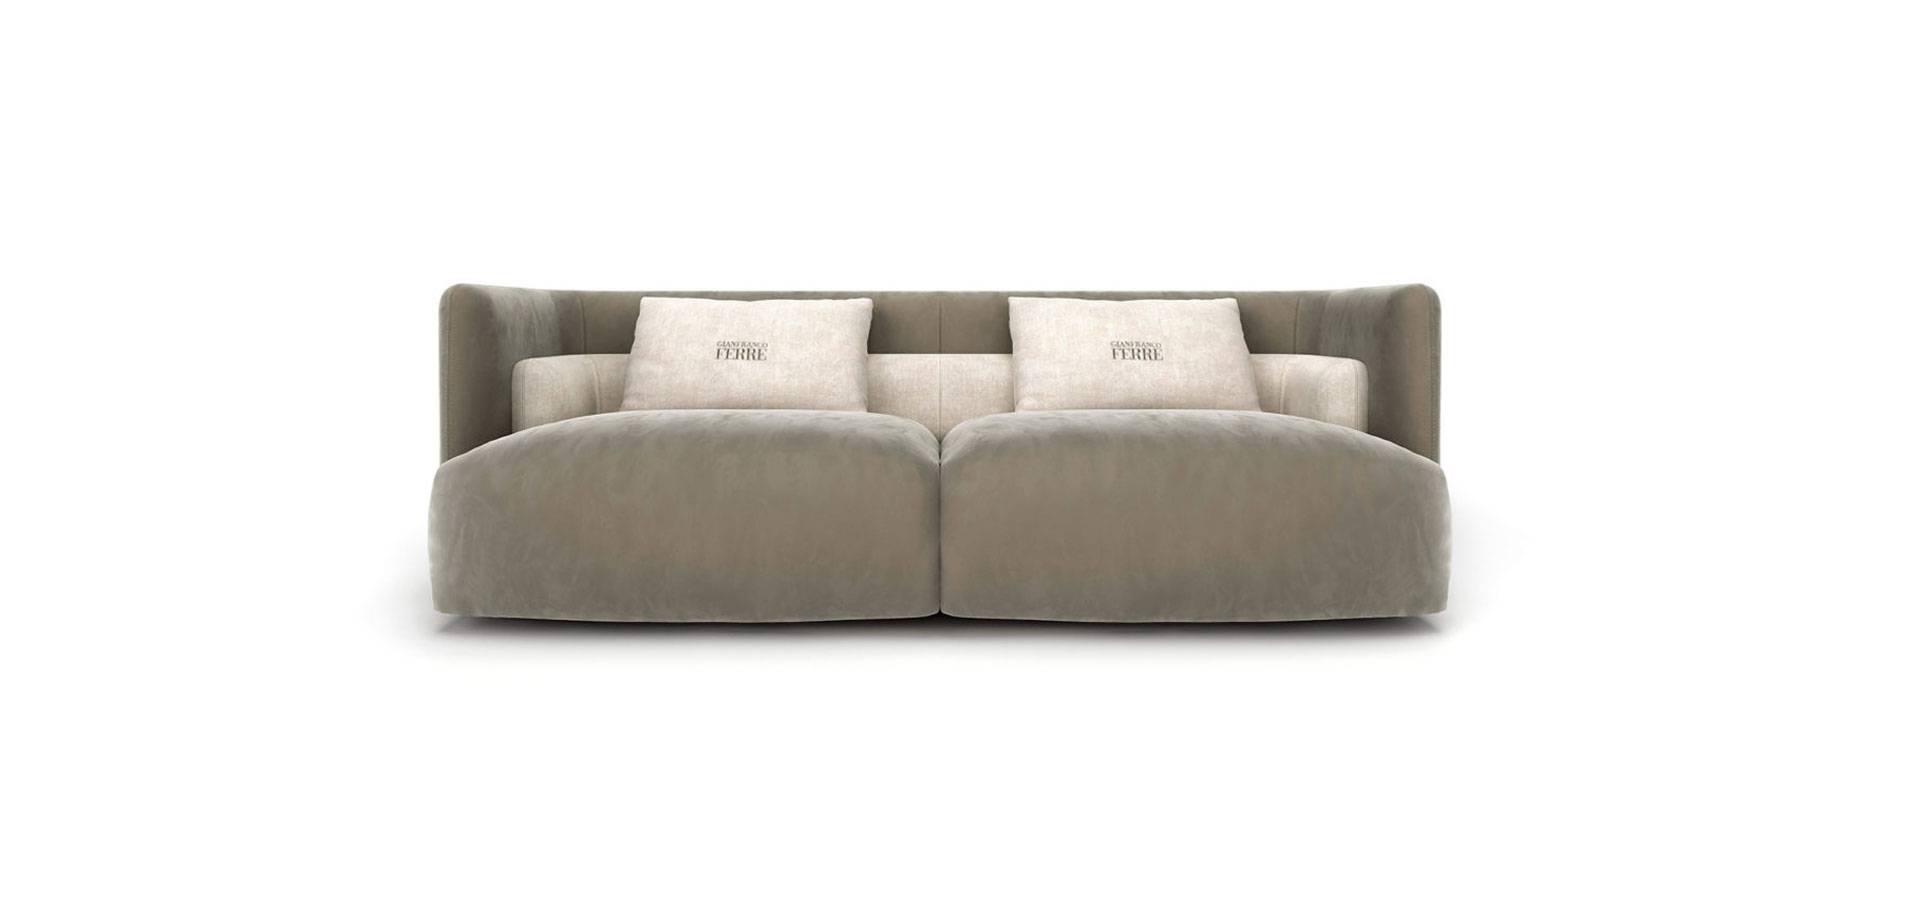 malcolm bonded leather sofa reviews